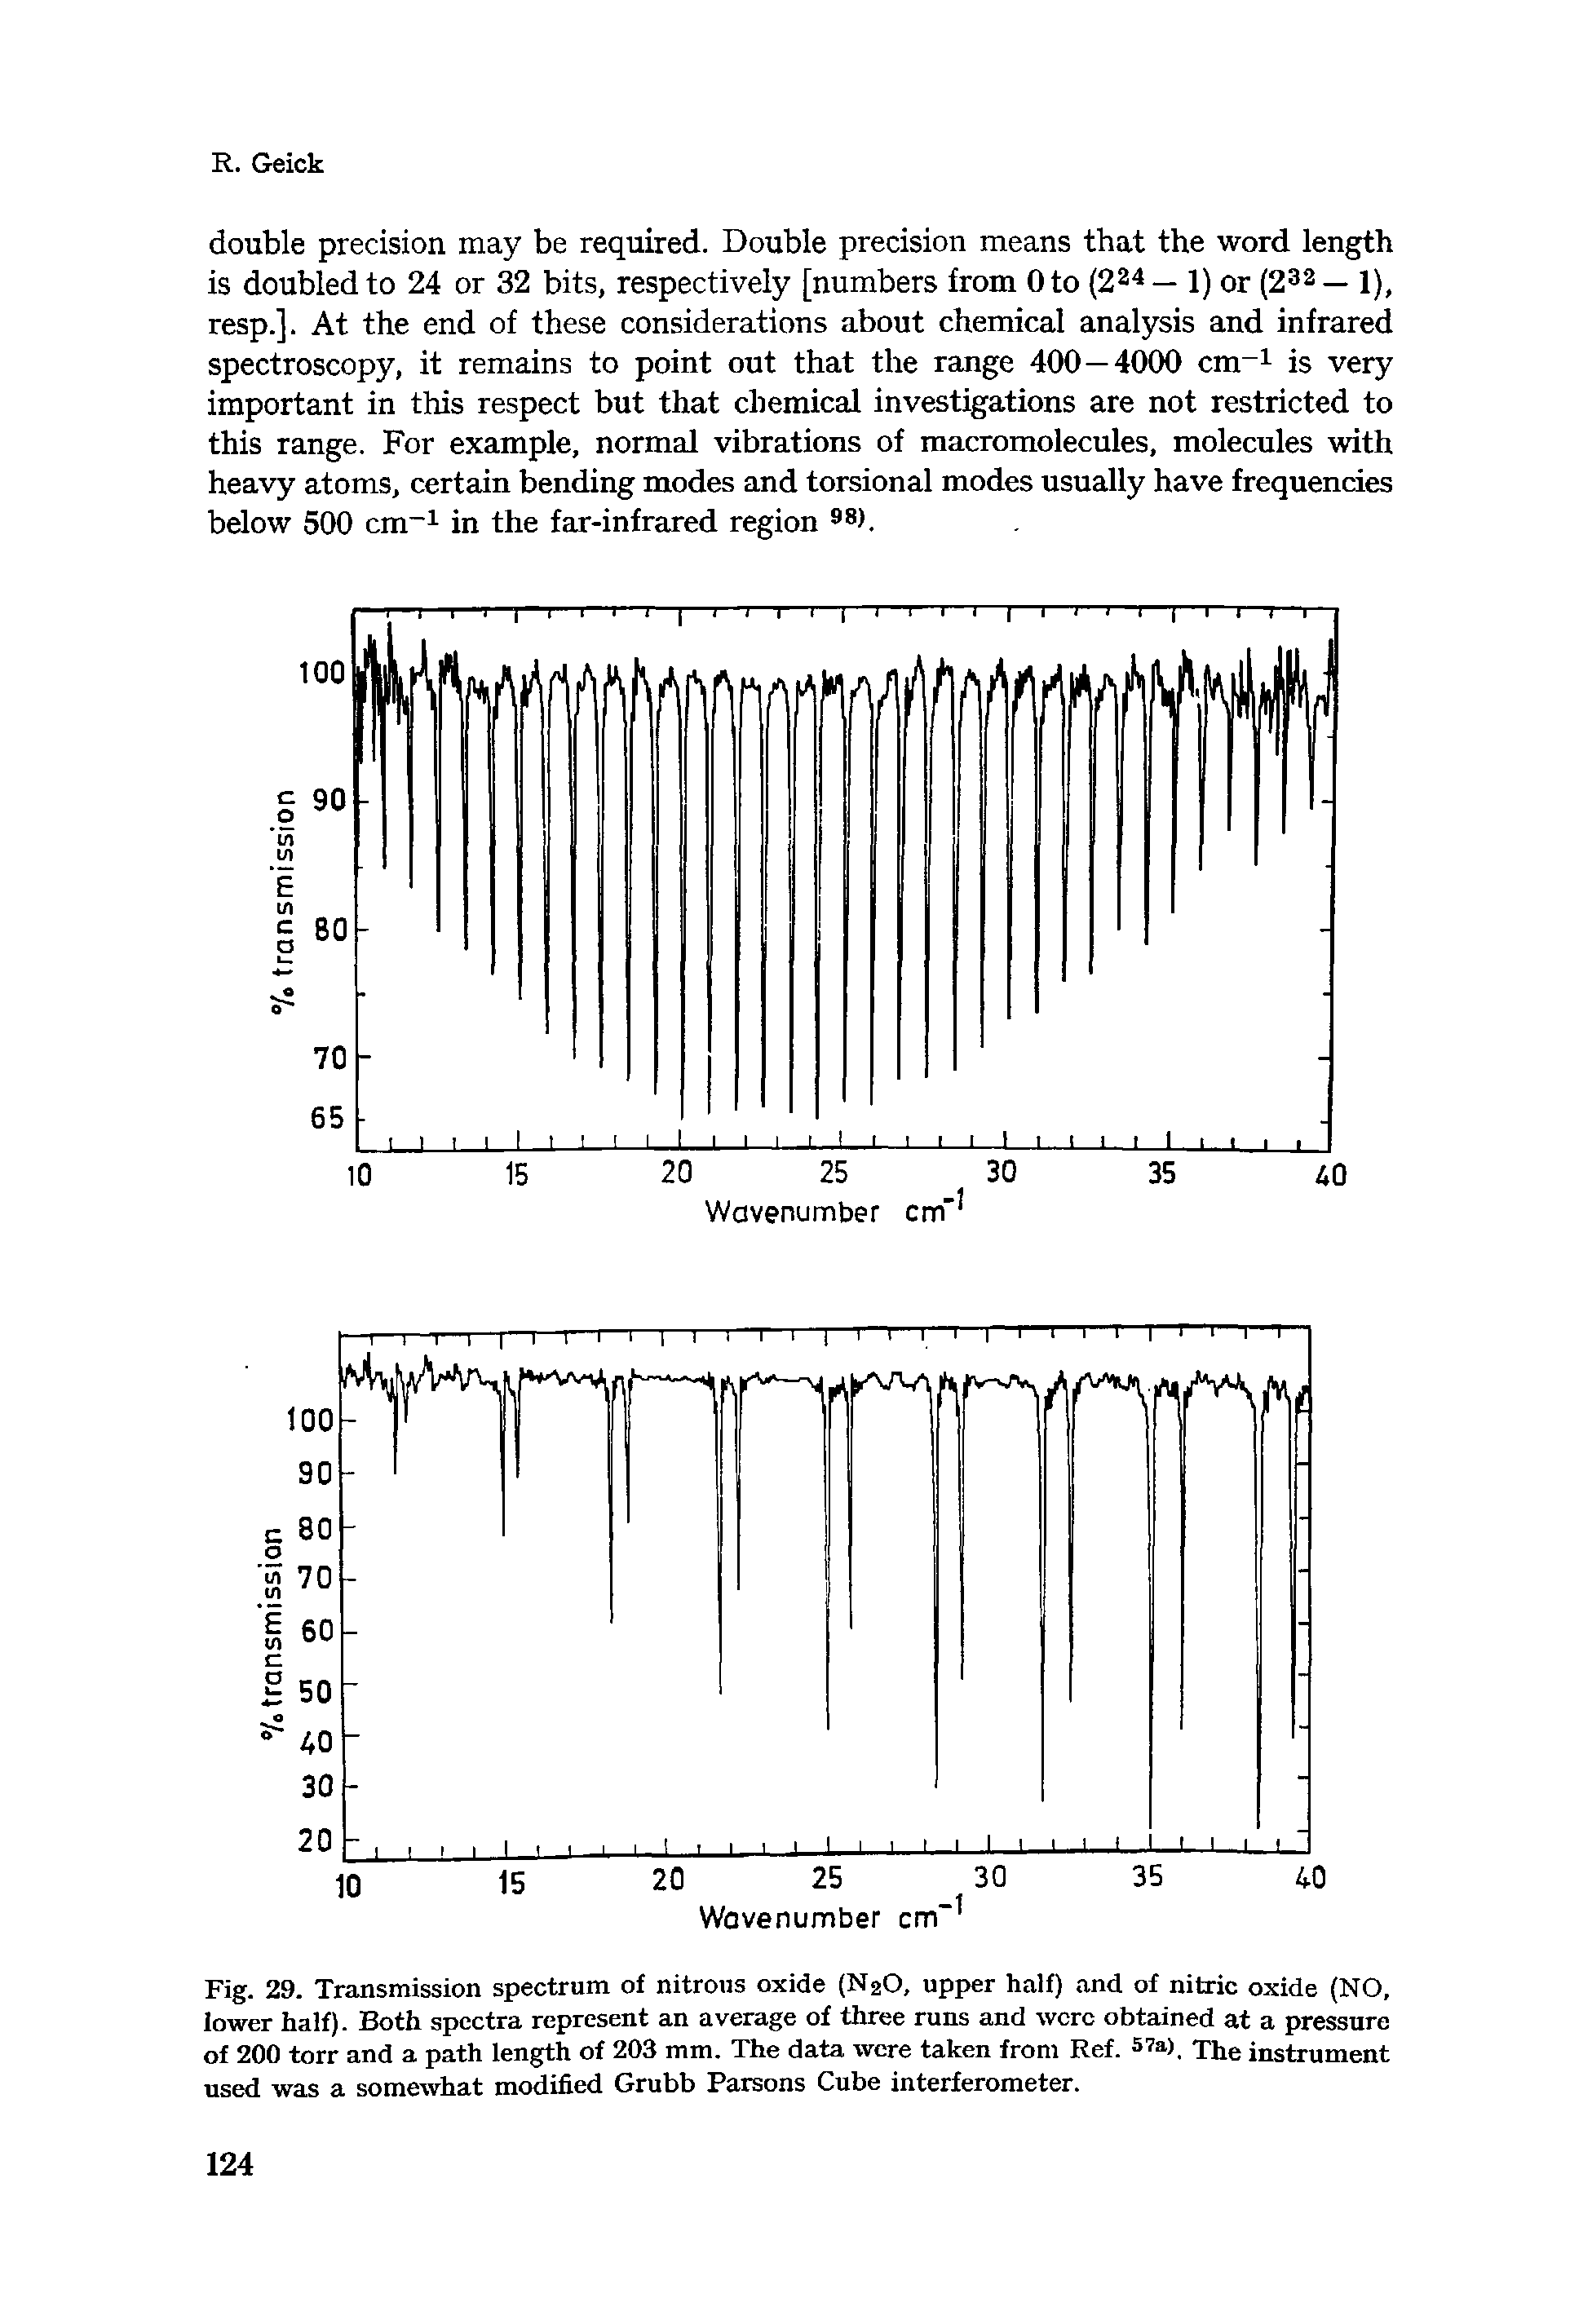 Fig. 29. Transmission spectrum of nitrous oxide (N2O, upper half) and of nitric oxide (NO, lower half). Both spectra represent an average of three runs and were obtained at a pressure of 200 torr and a path length of 203 mm. The data were taken from Ref. S " ). The instrument used was a somewhat modified Grubb Parsons Cube interferometer.